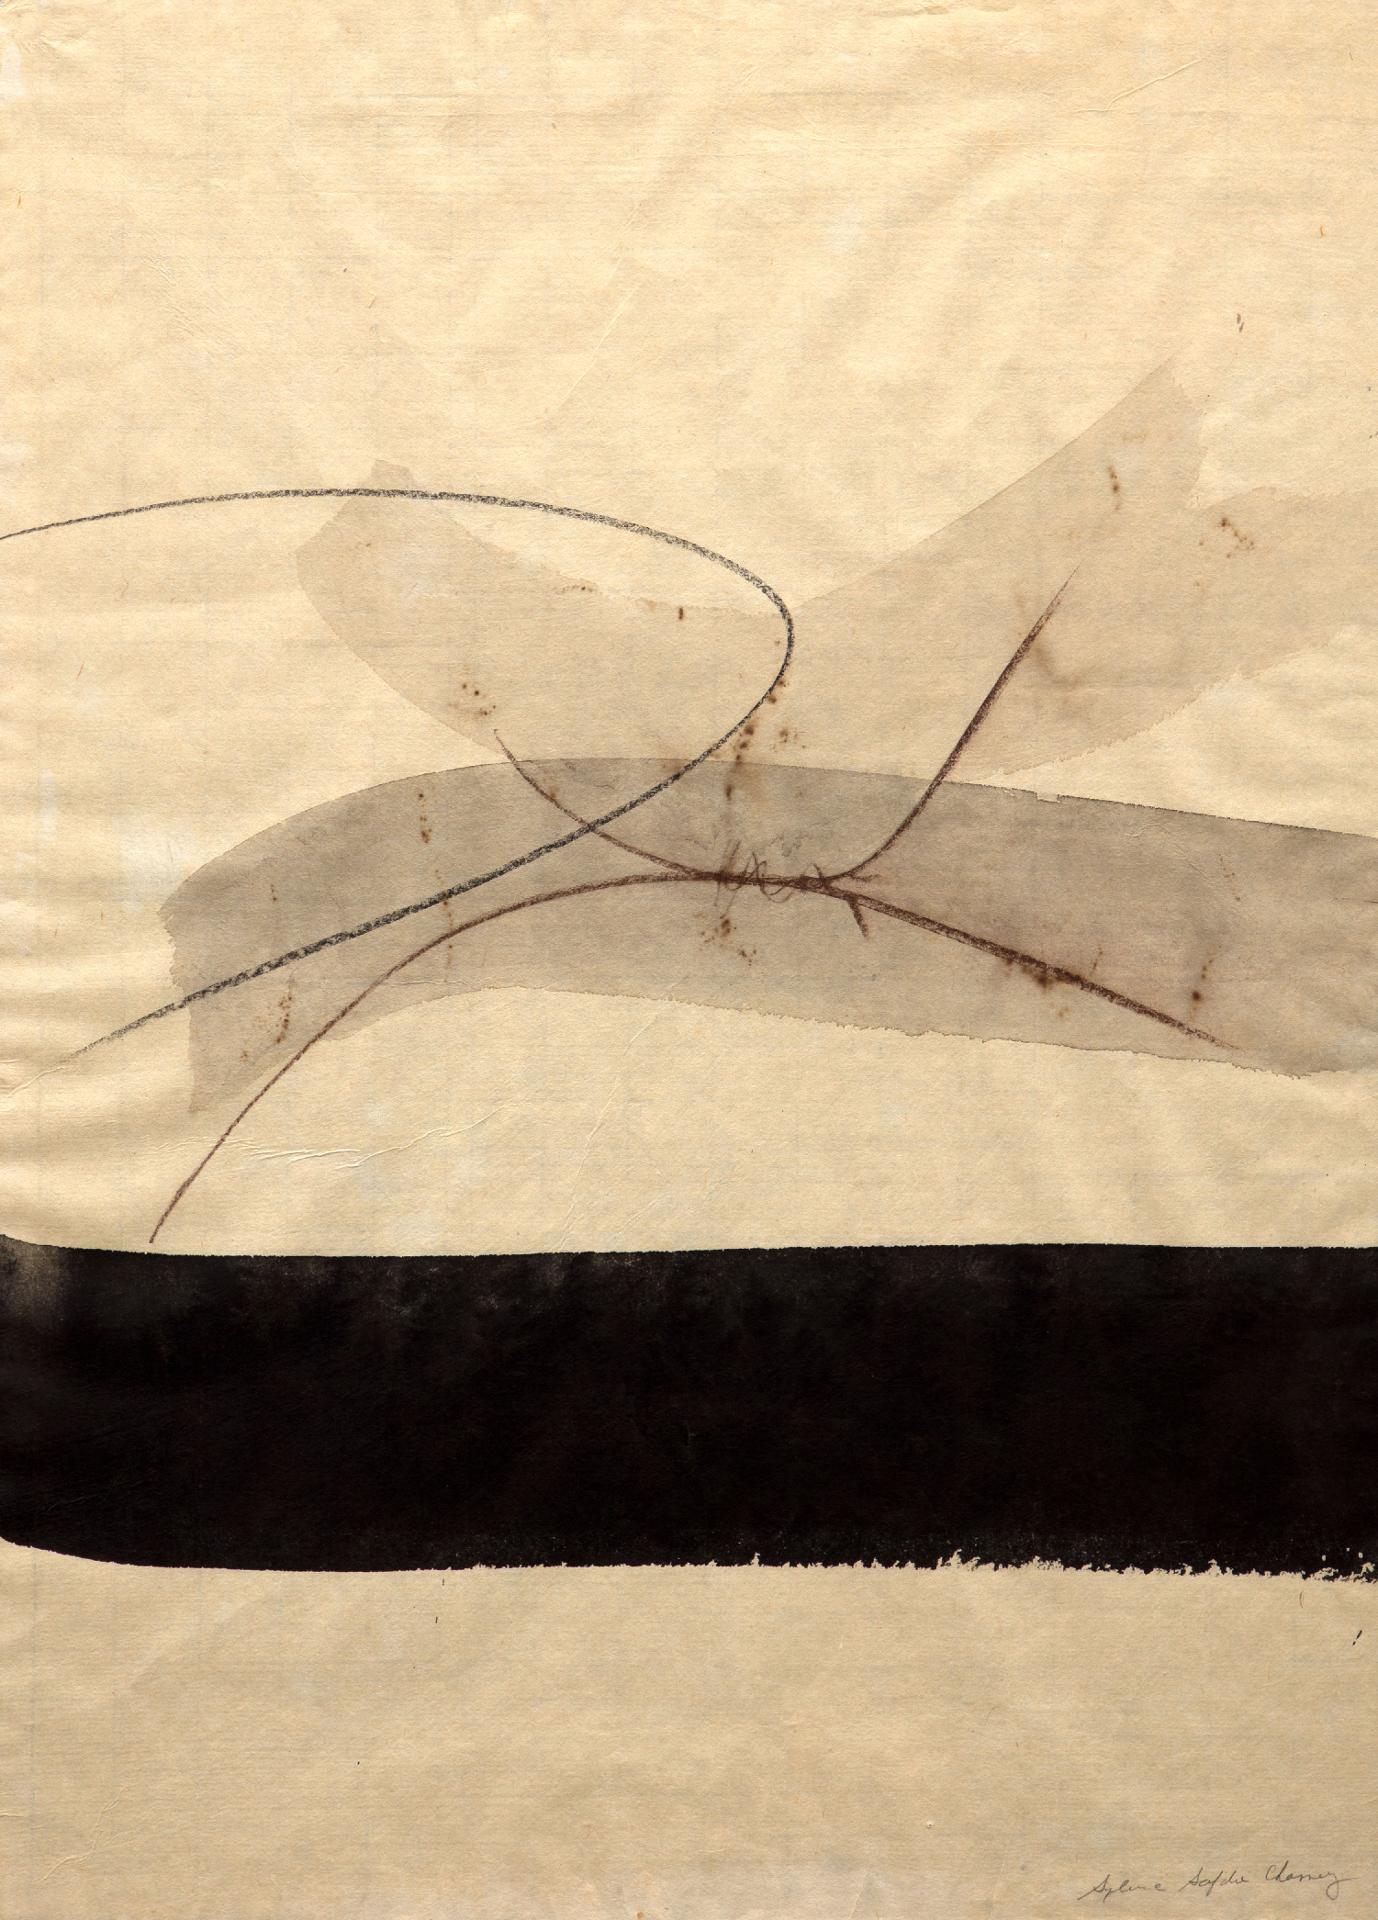 Sylvia Safdie Charney (1942) - Drawing on Rice Paper, c. 1980